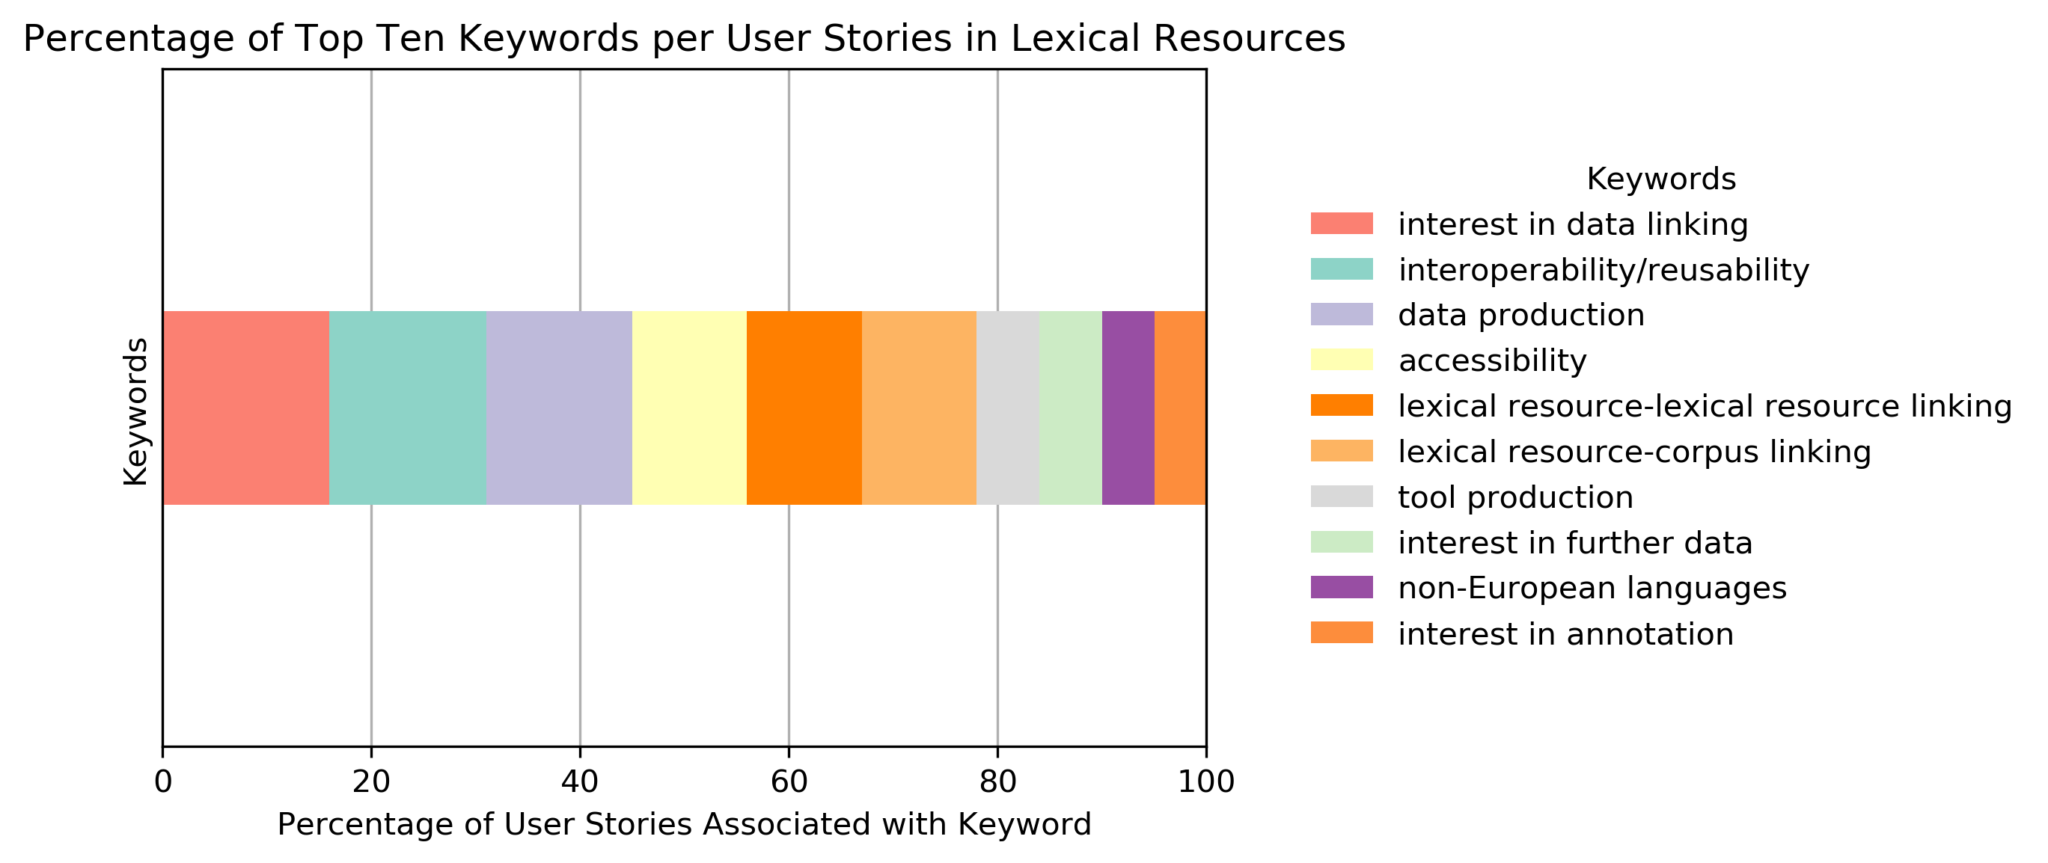 Percentage of User Stories in Lexical Resources for the 10 most-used keywords